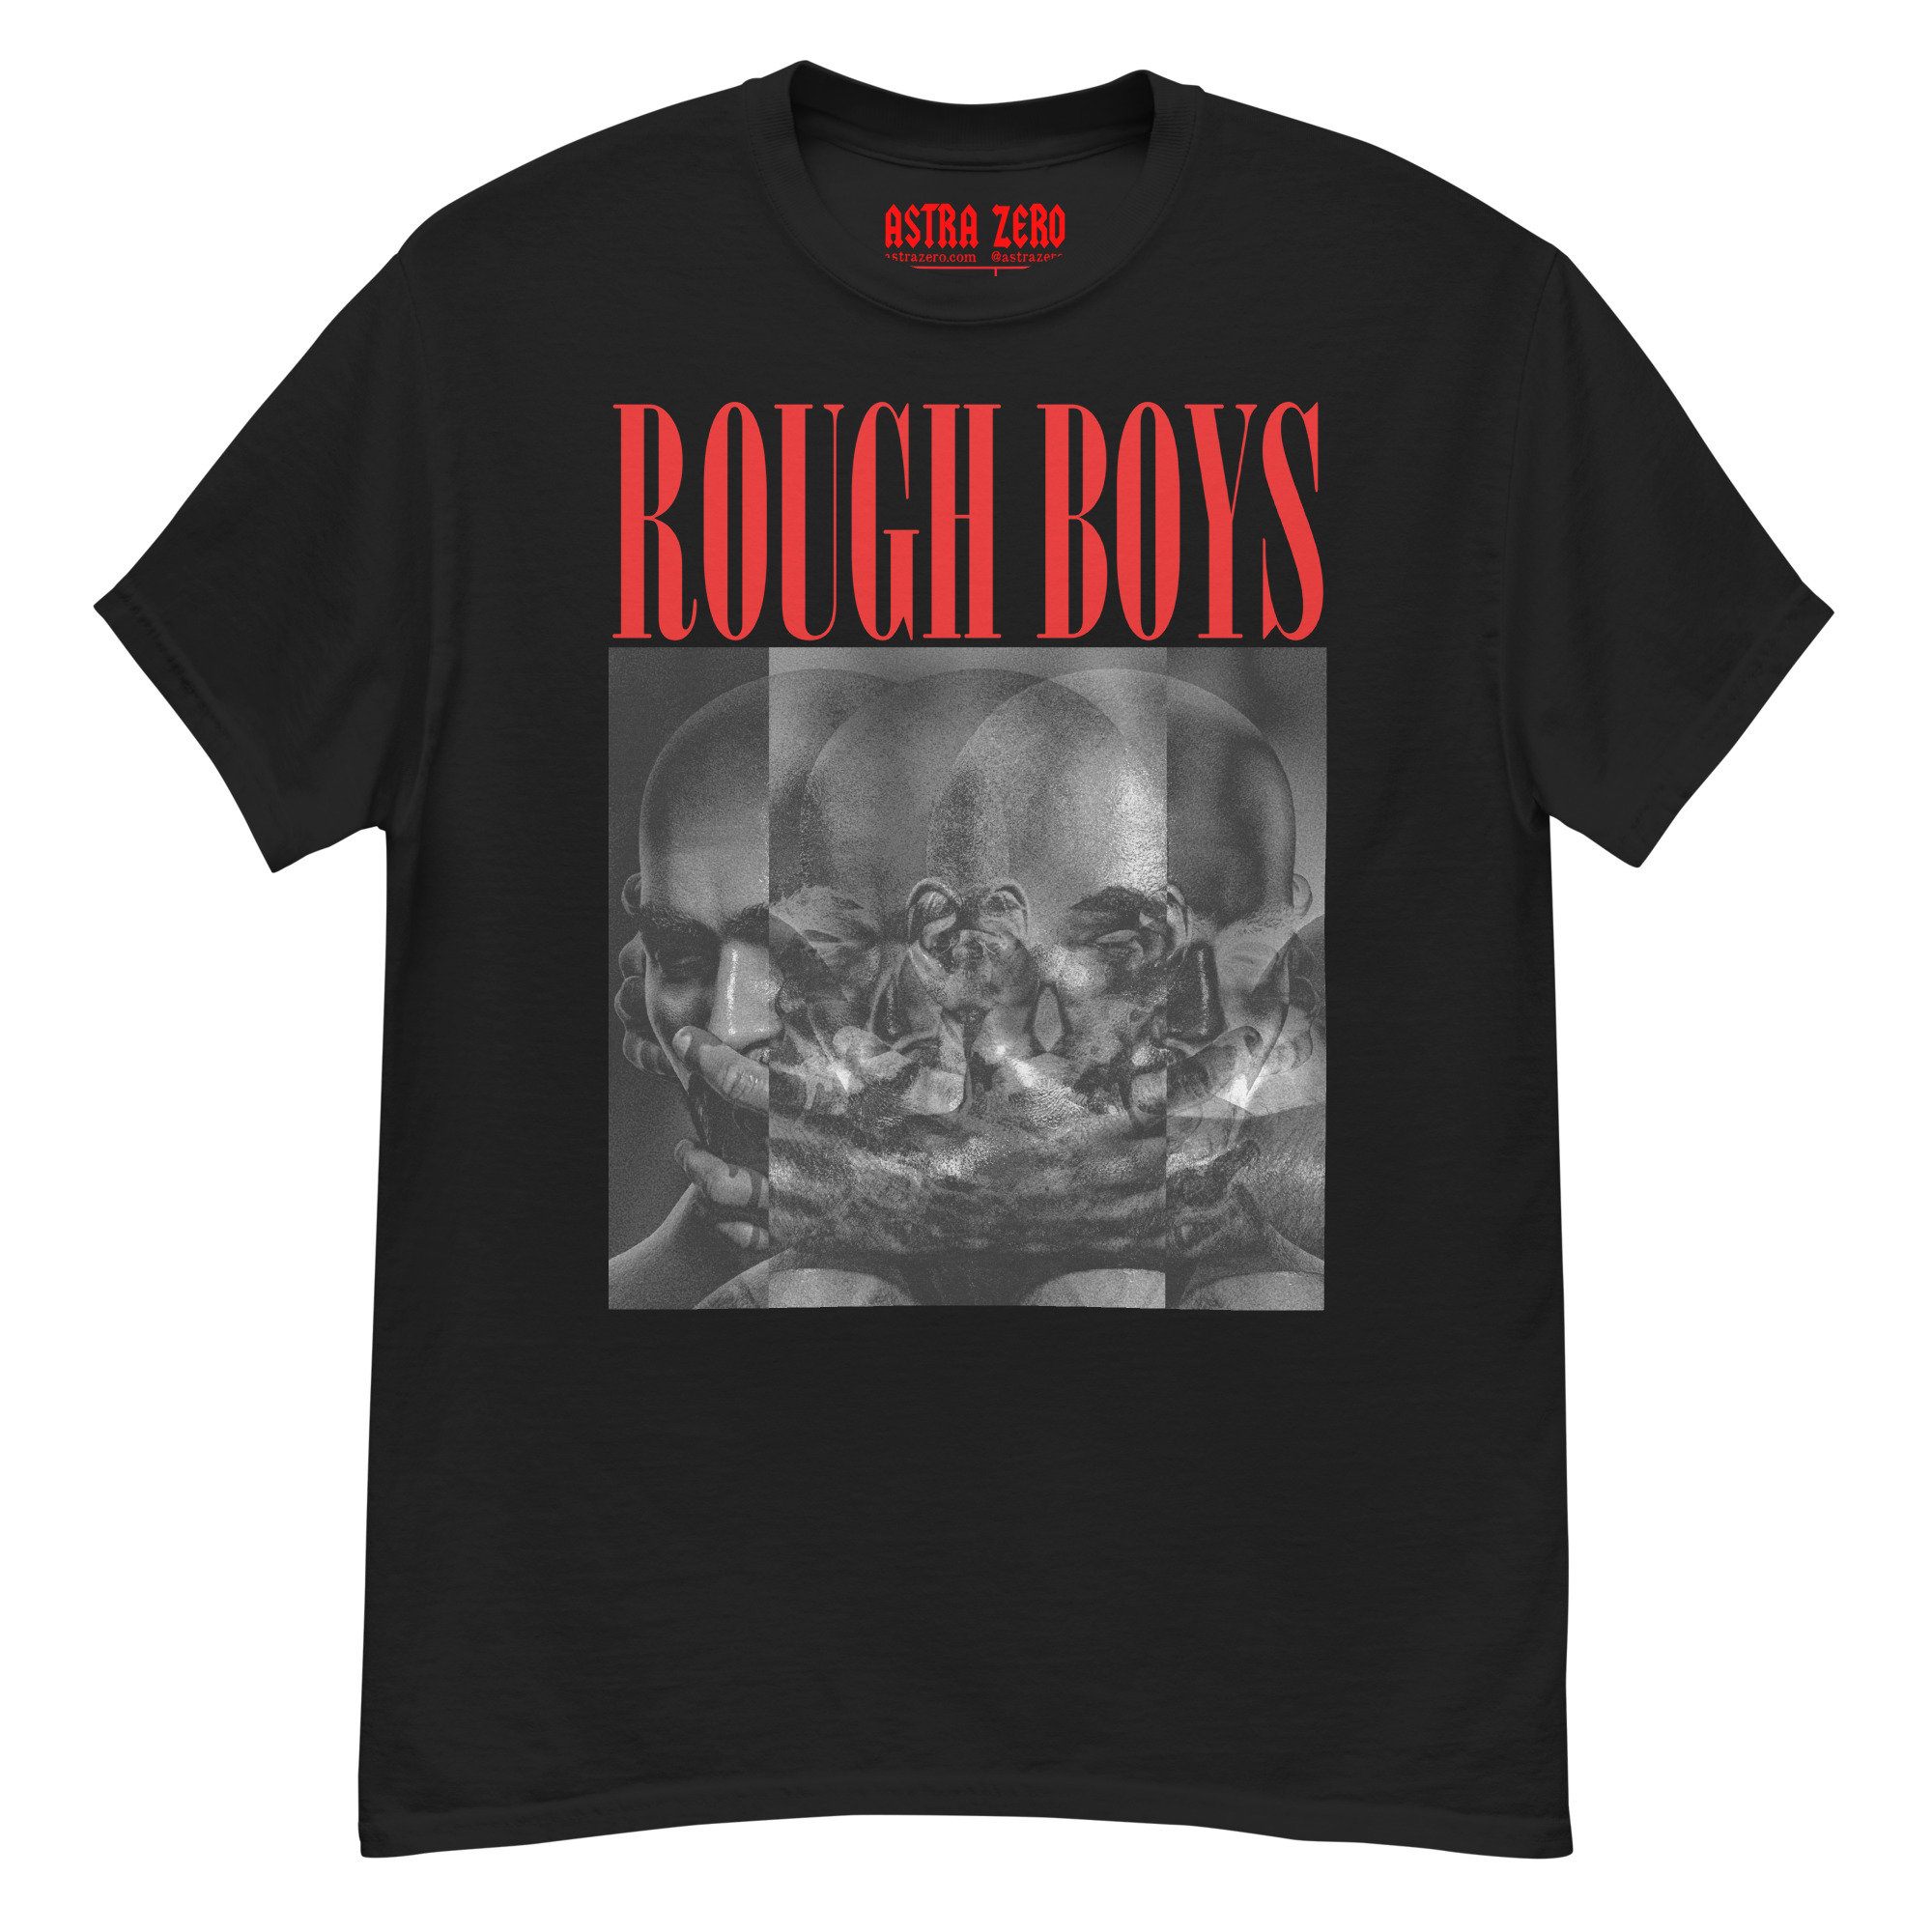 Featured image for “Rough Boys - Men's classic tee”